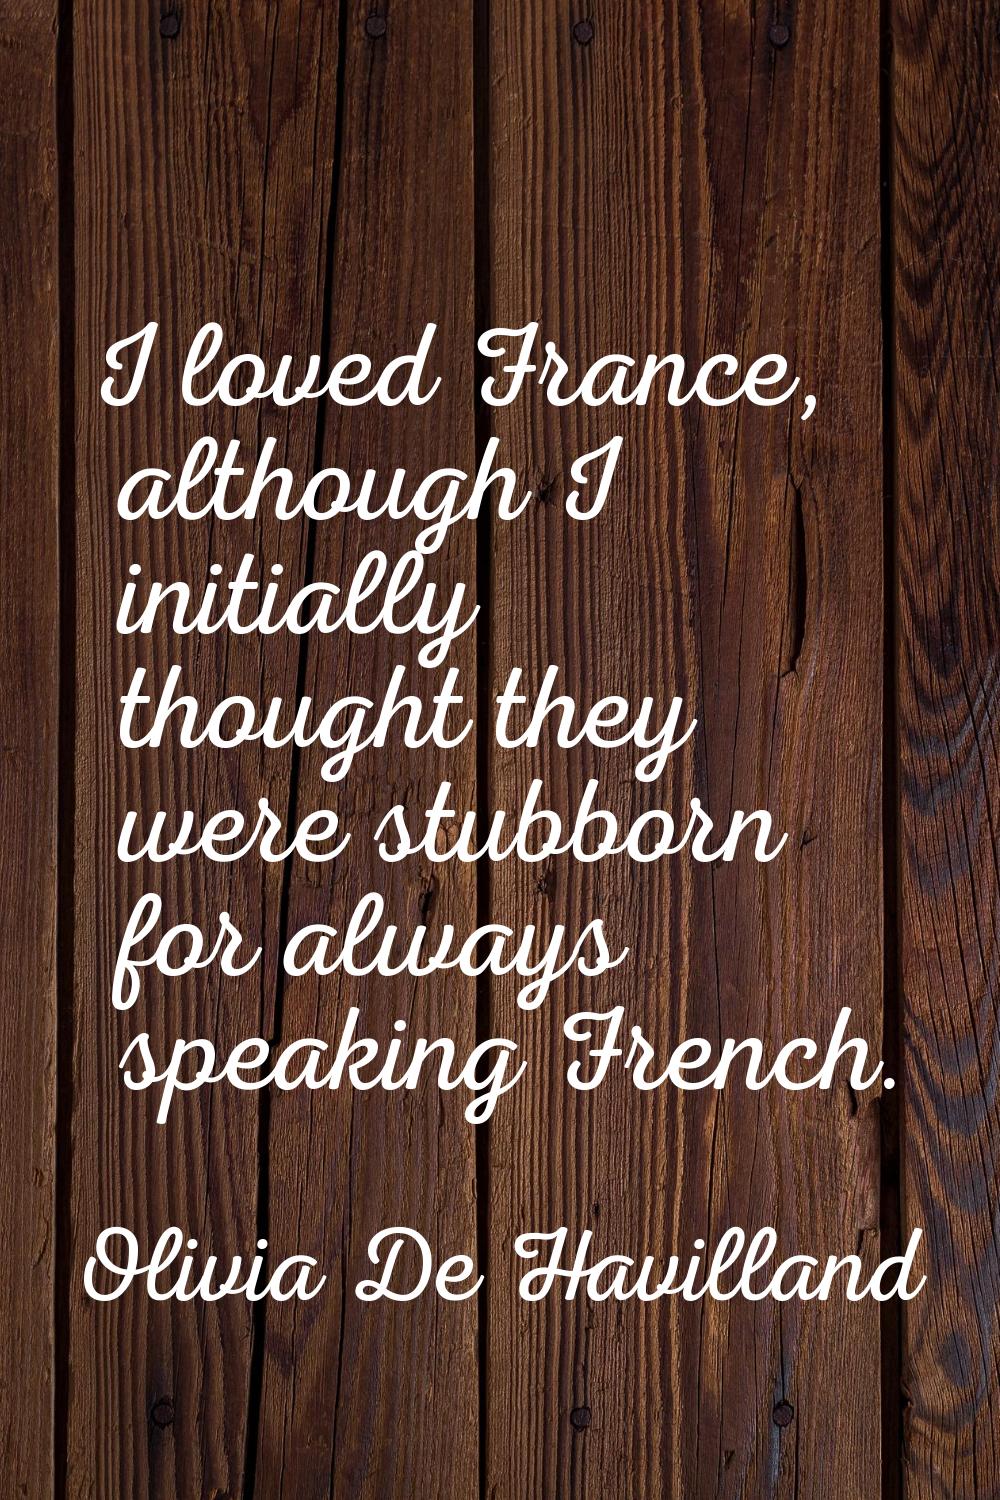 I loved France, although I initially thought they were stubborn for always speaking French.